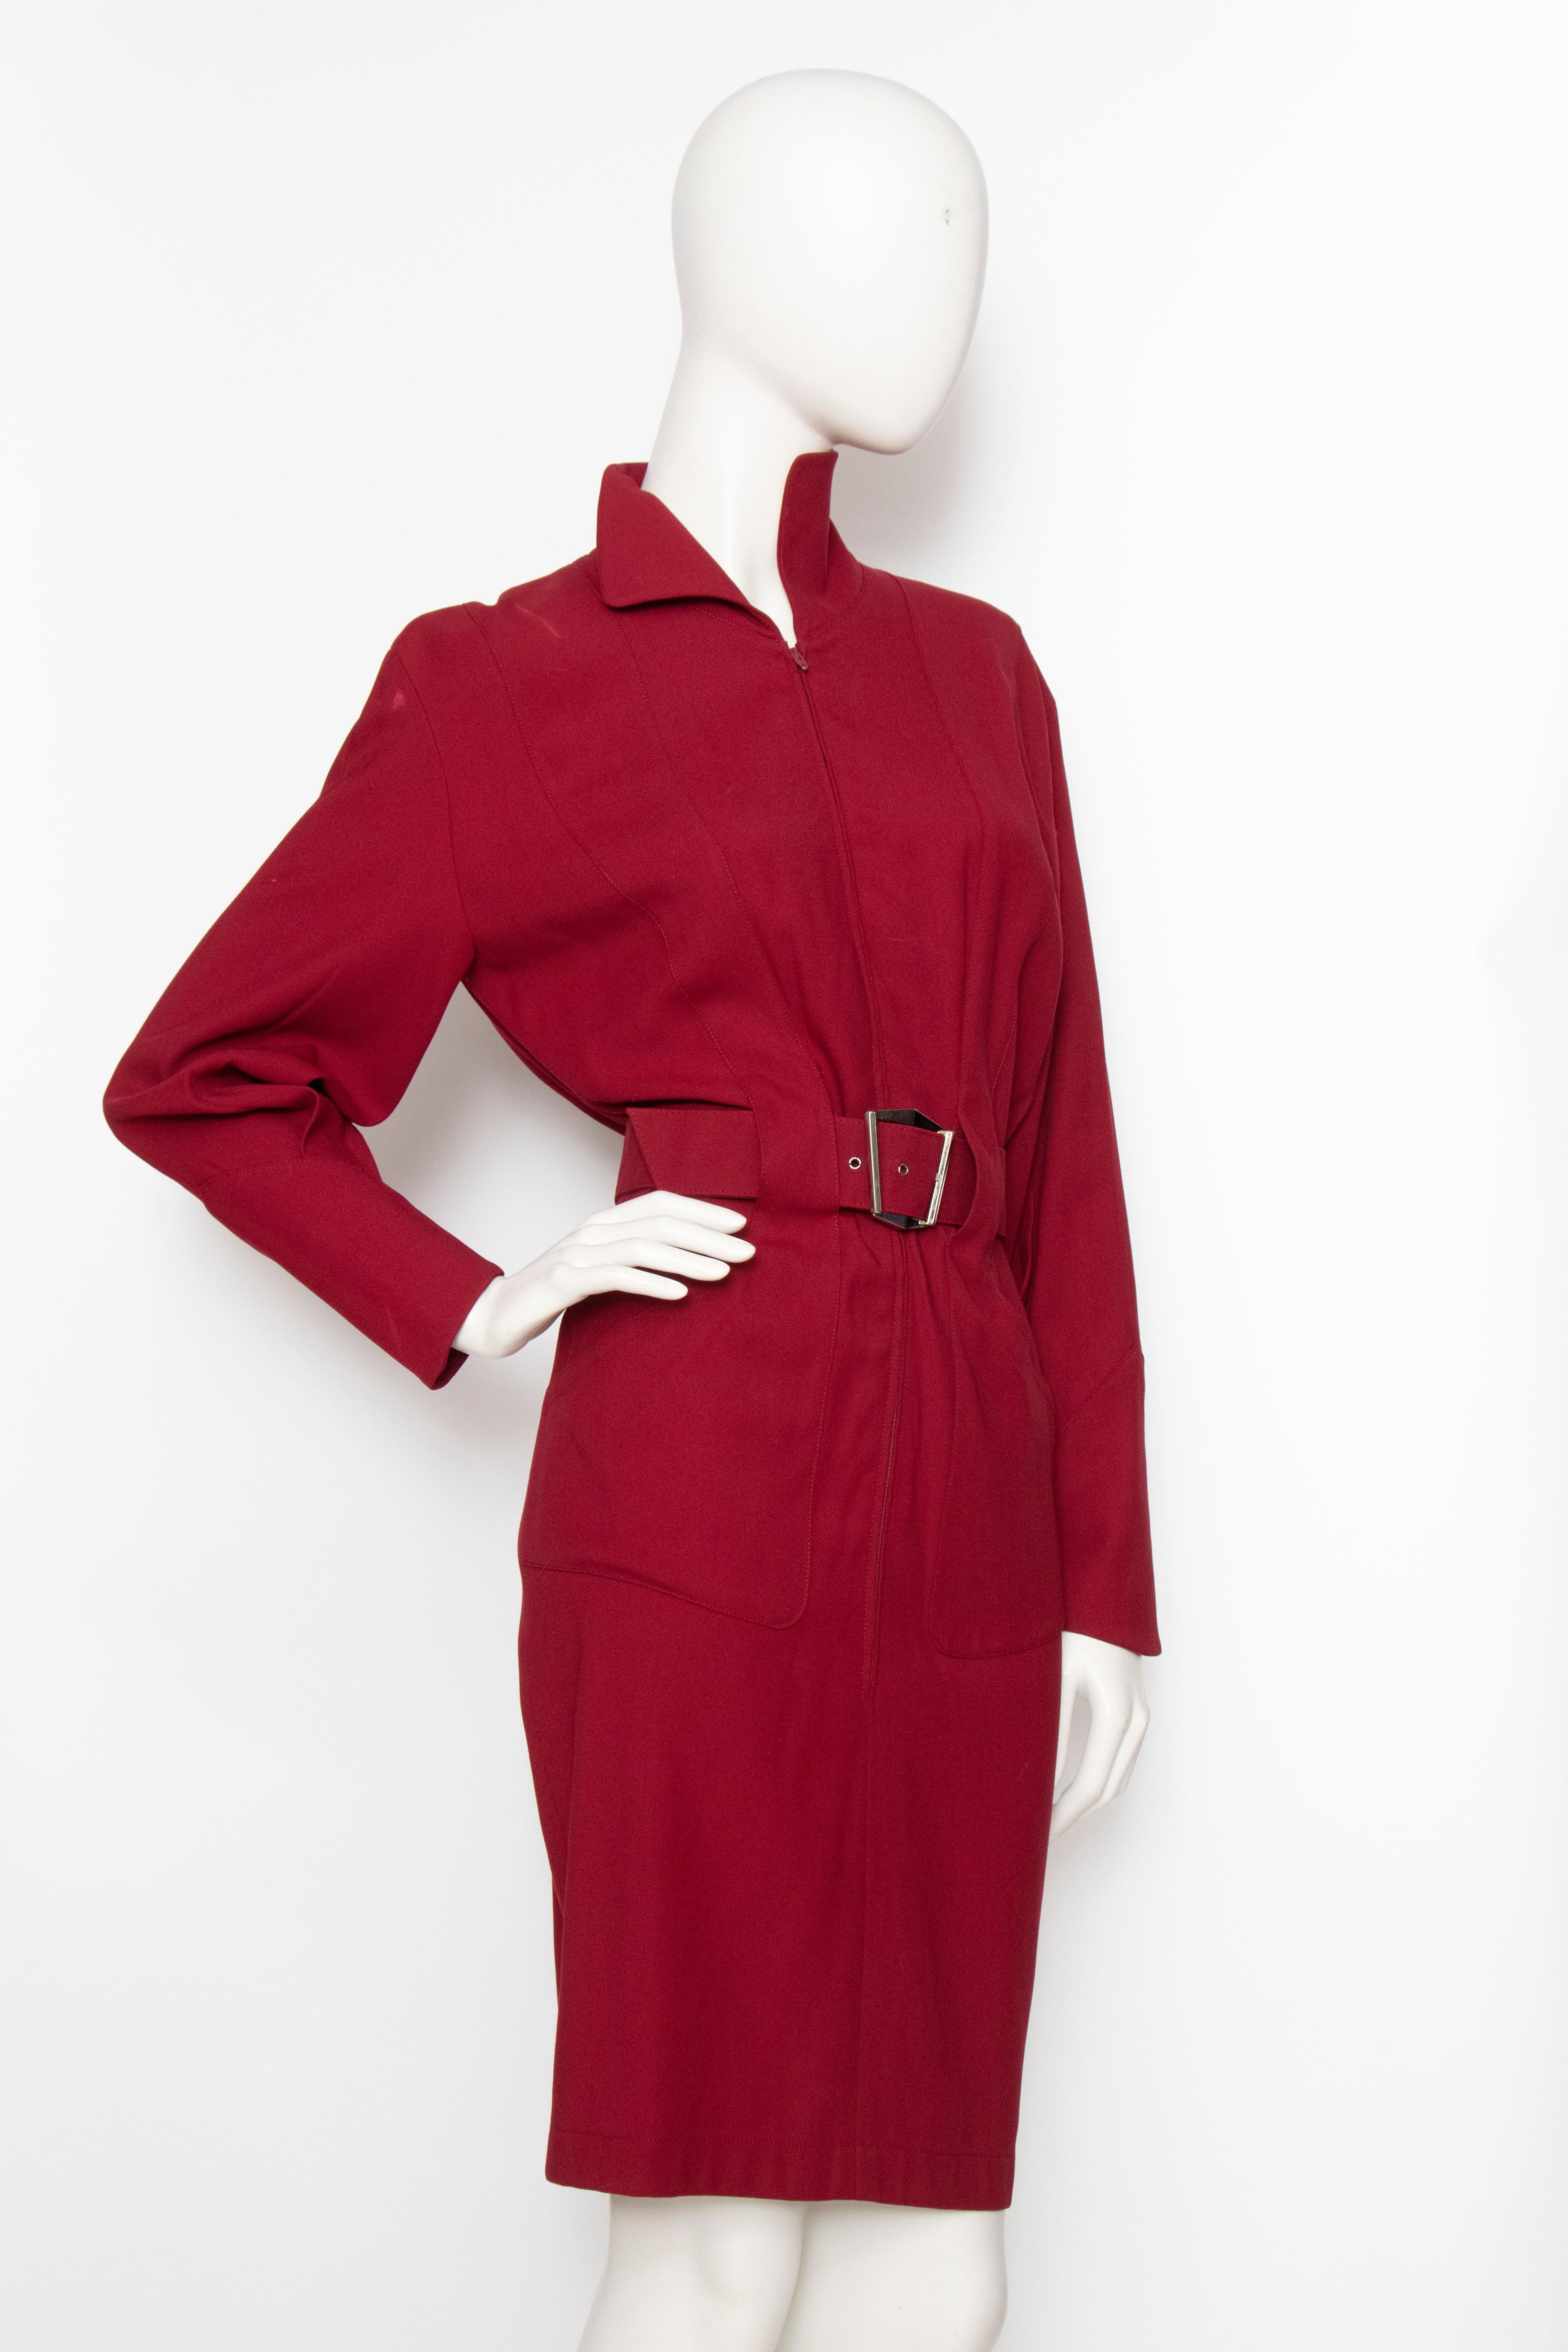 A fabulous 1980s Thierry Mugler wine red wool dress with a fitted wasp waist, pencil skirt and long sleeves with fitted cuffs. The dress is fully lined and has a matching waist belt with a characteristic graphic silver buckle. 

The size of the